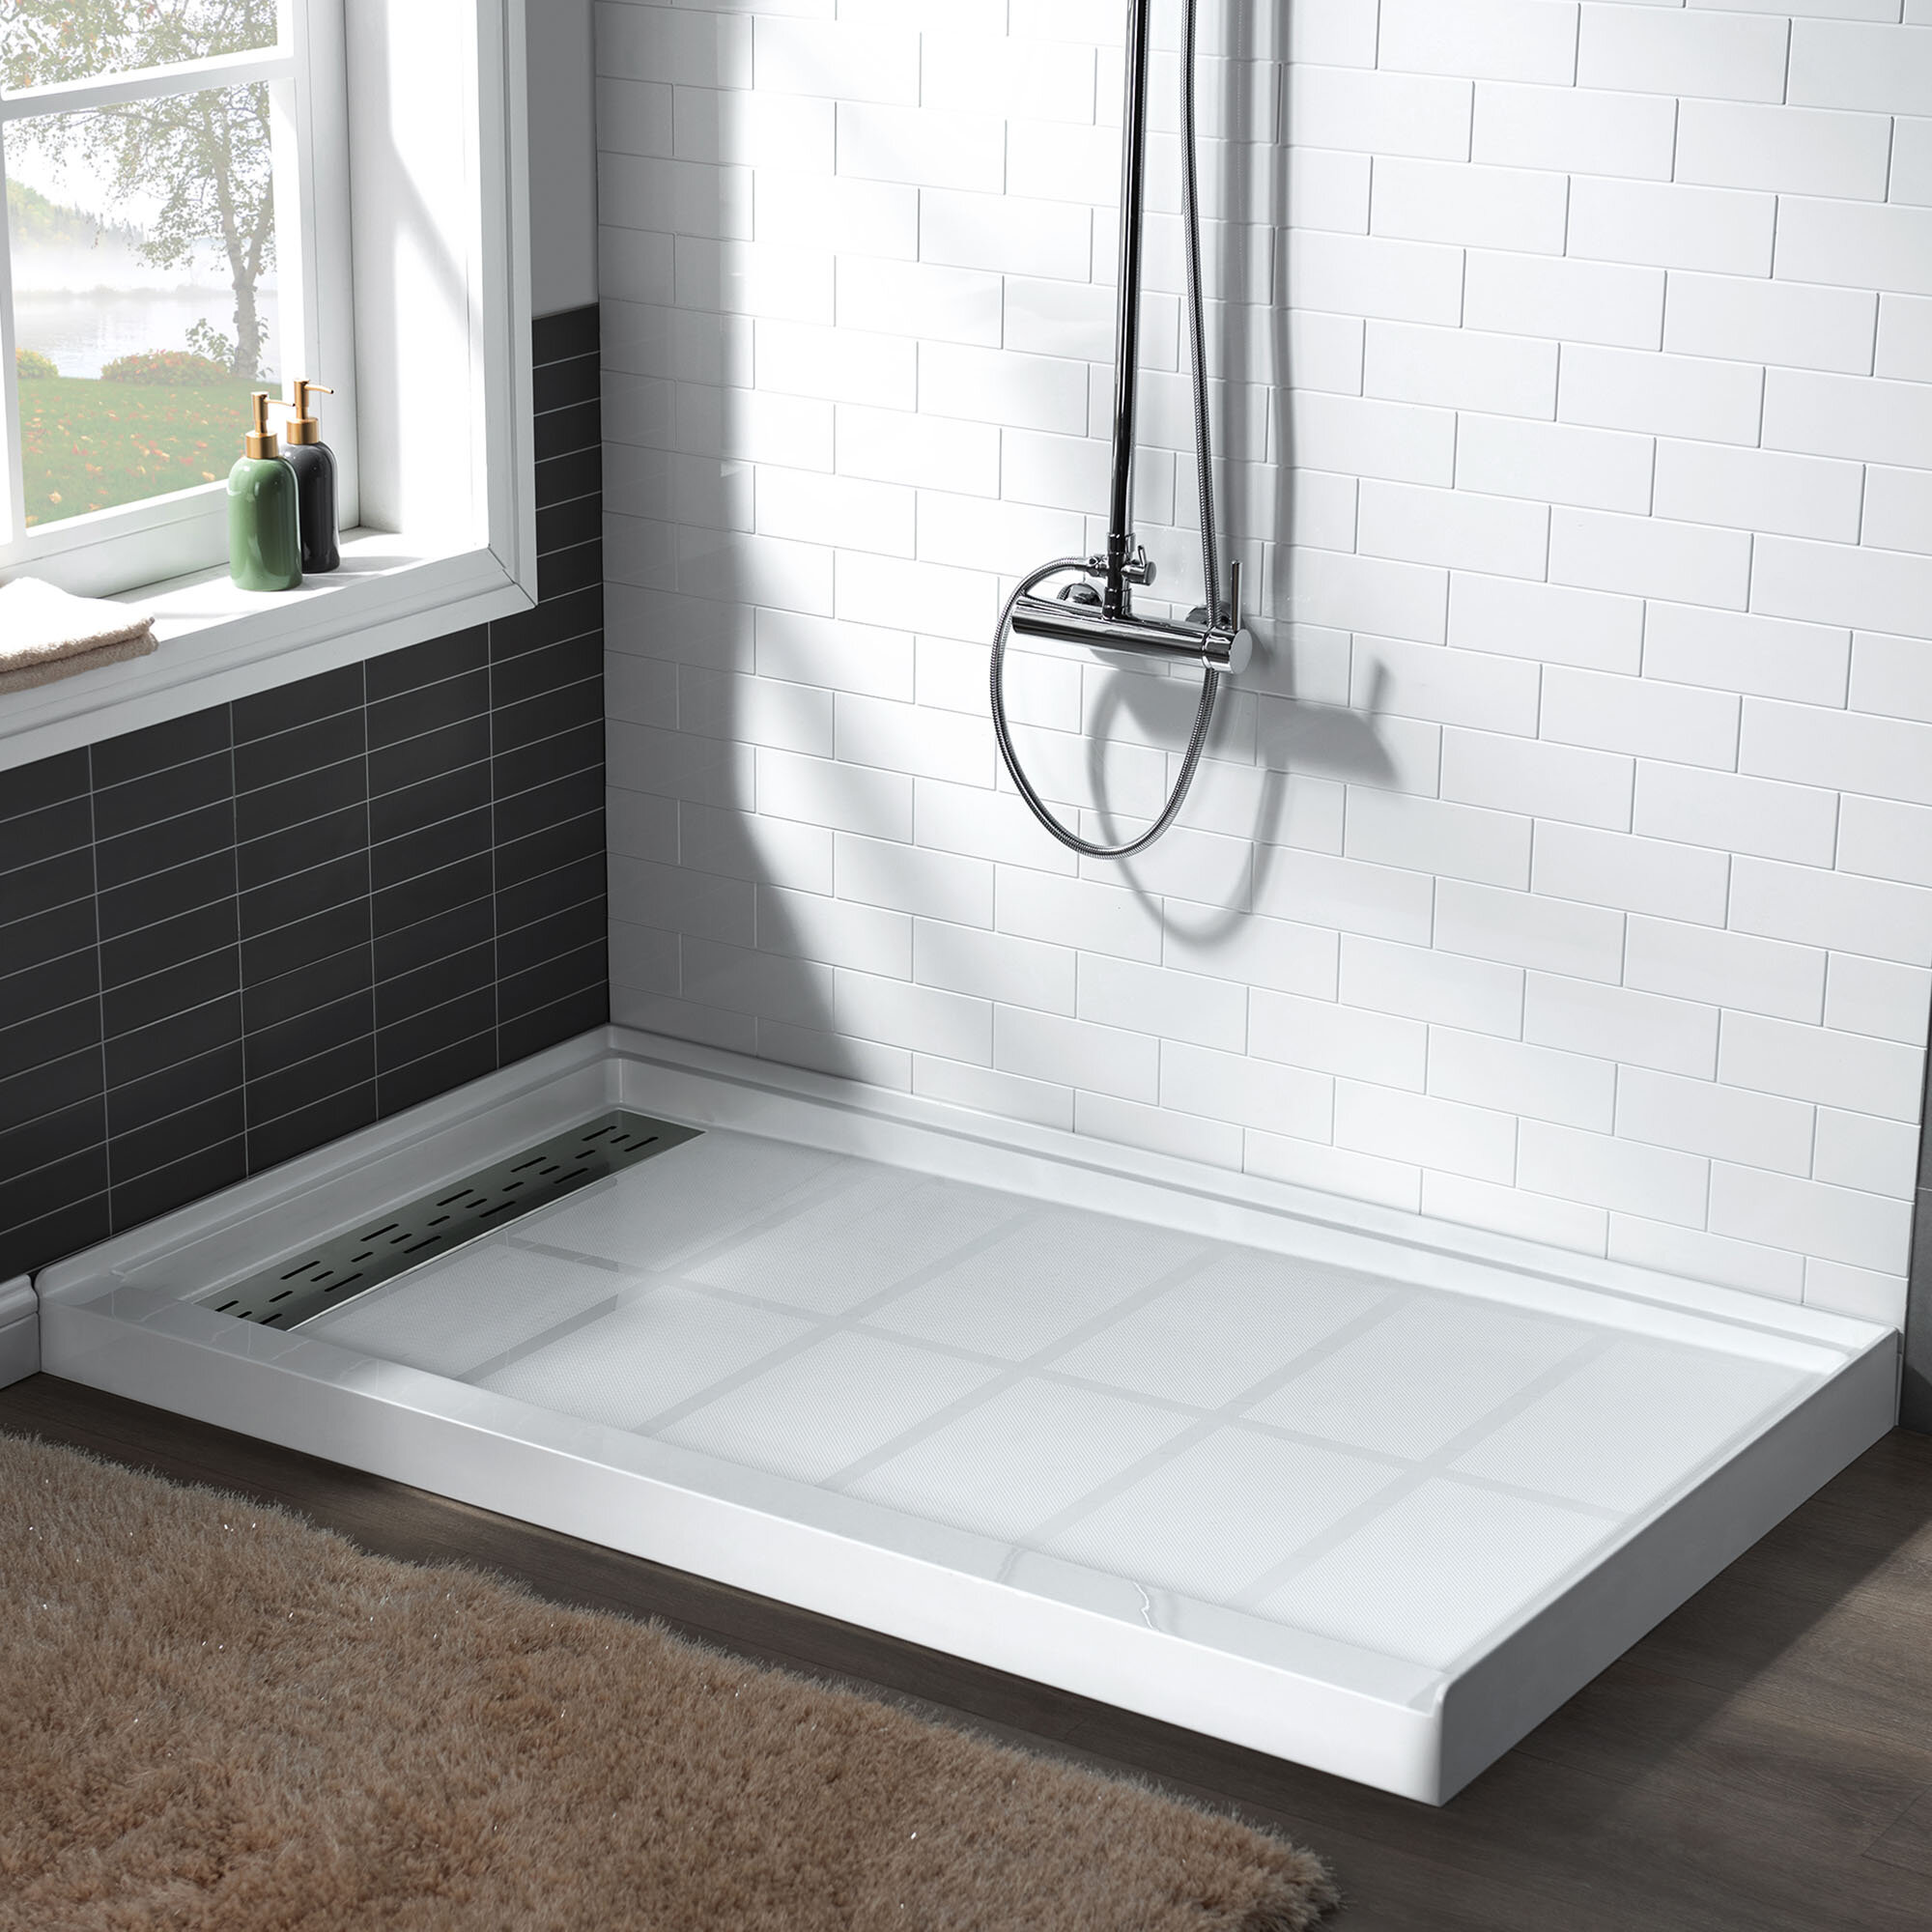 Woodbridge Krasik 60 in. L x 30 in. W Alcove Solid Surface Shower Pan Base with Left Drain in White with Chrome Cover, White with Chrome Drain Cover